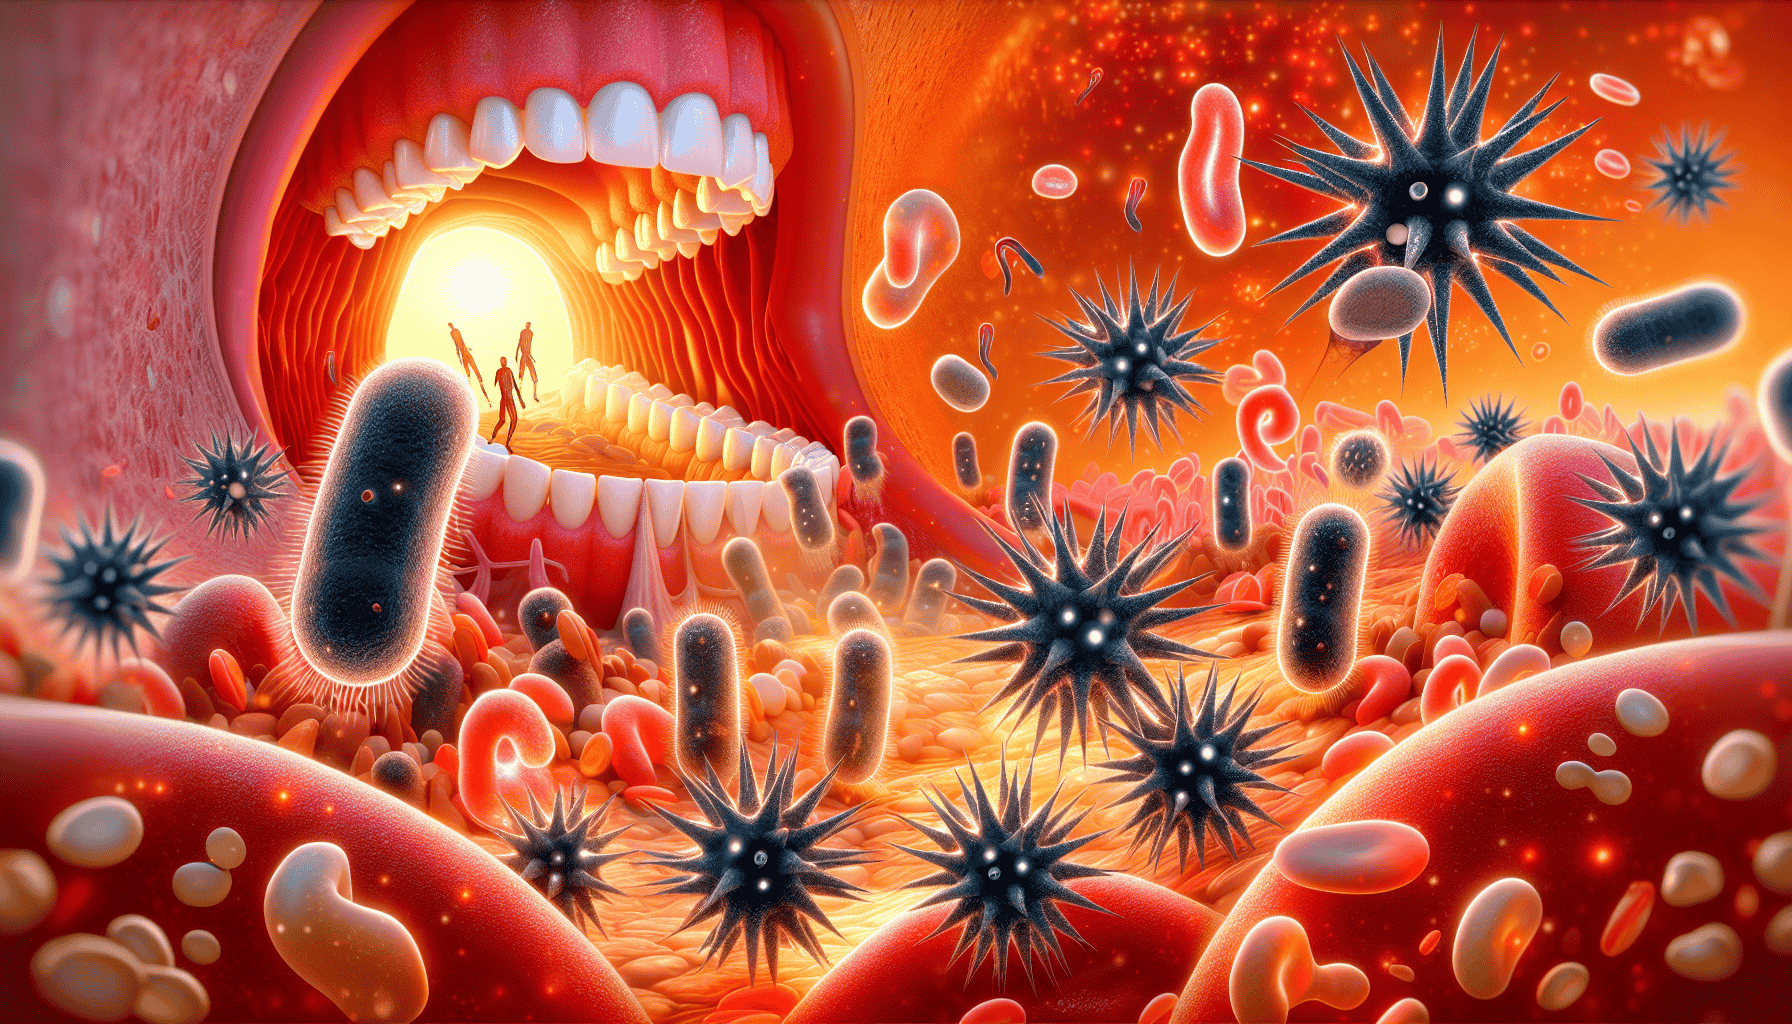 Conceptual illustration of immune system response to oral infections